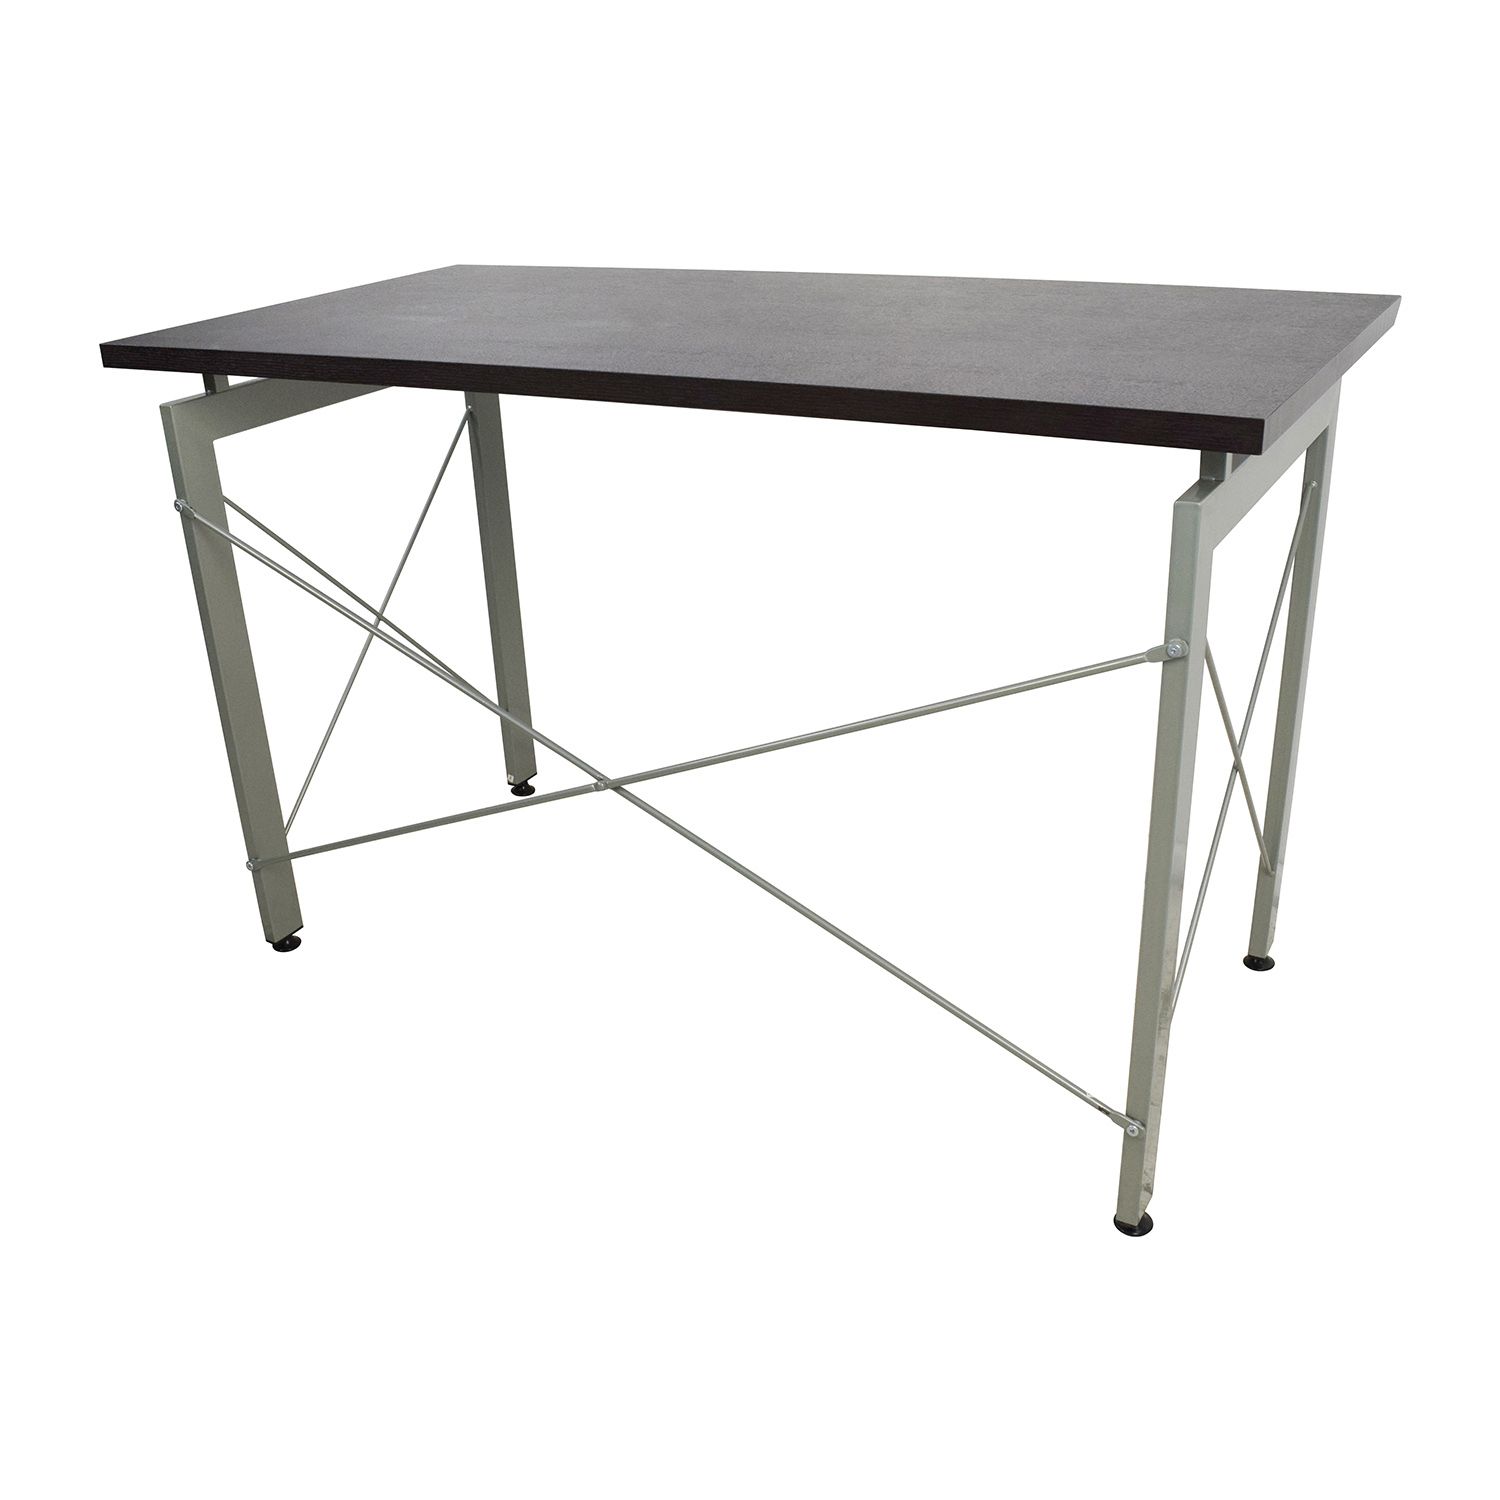 39% Off – Allmodern All Modern Wood And Metal Desk / Tables With Modern Teal Steel Desks (View 12 of 15)